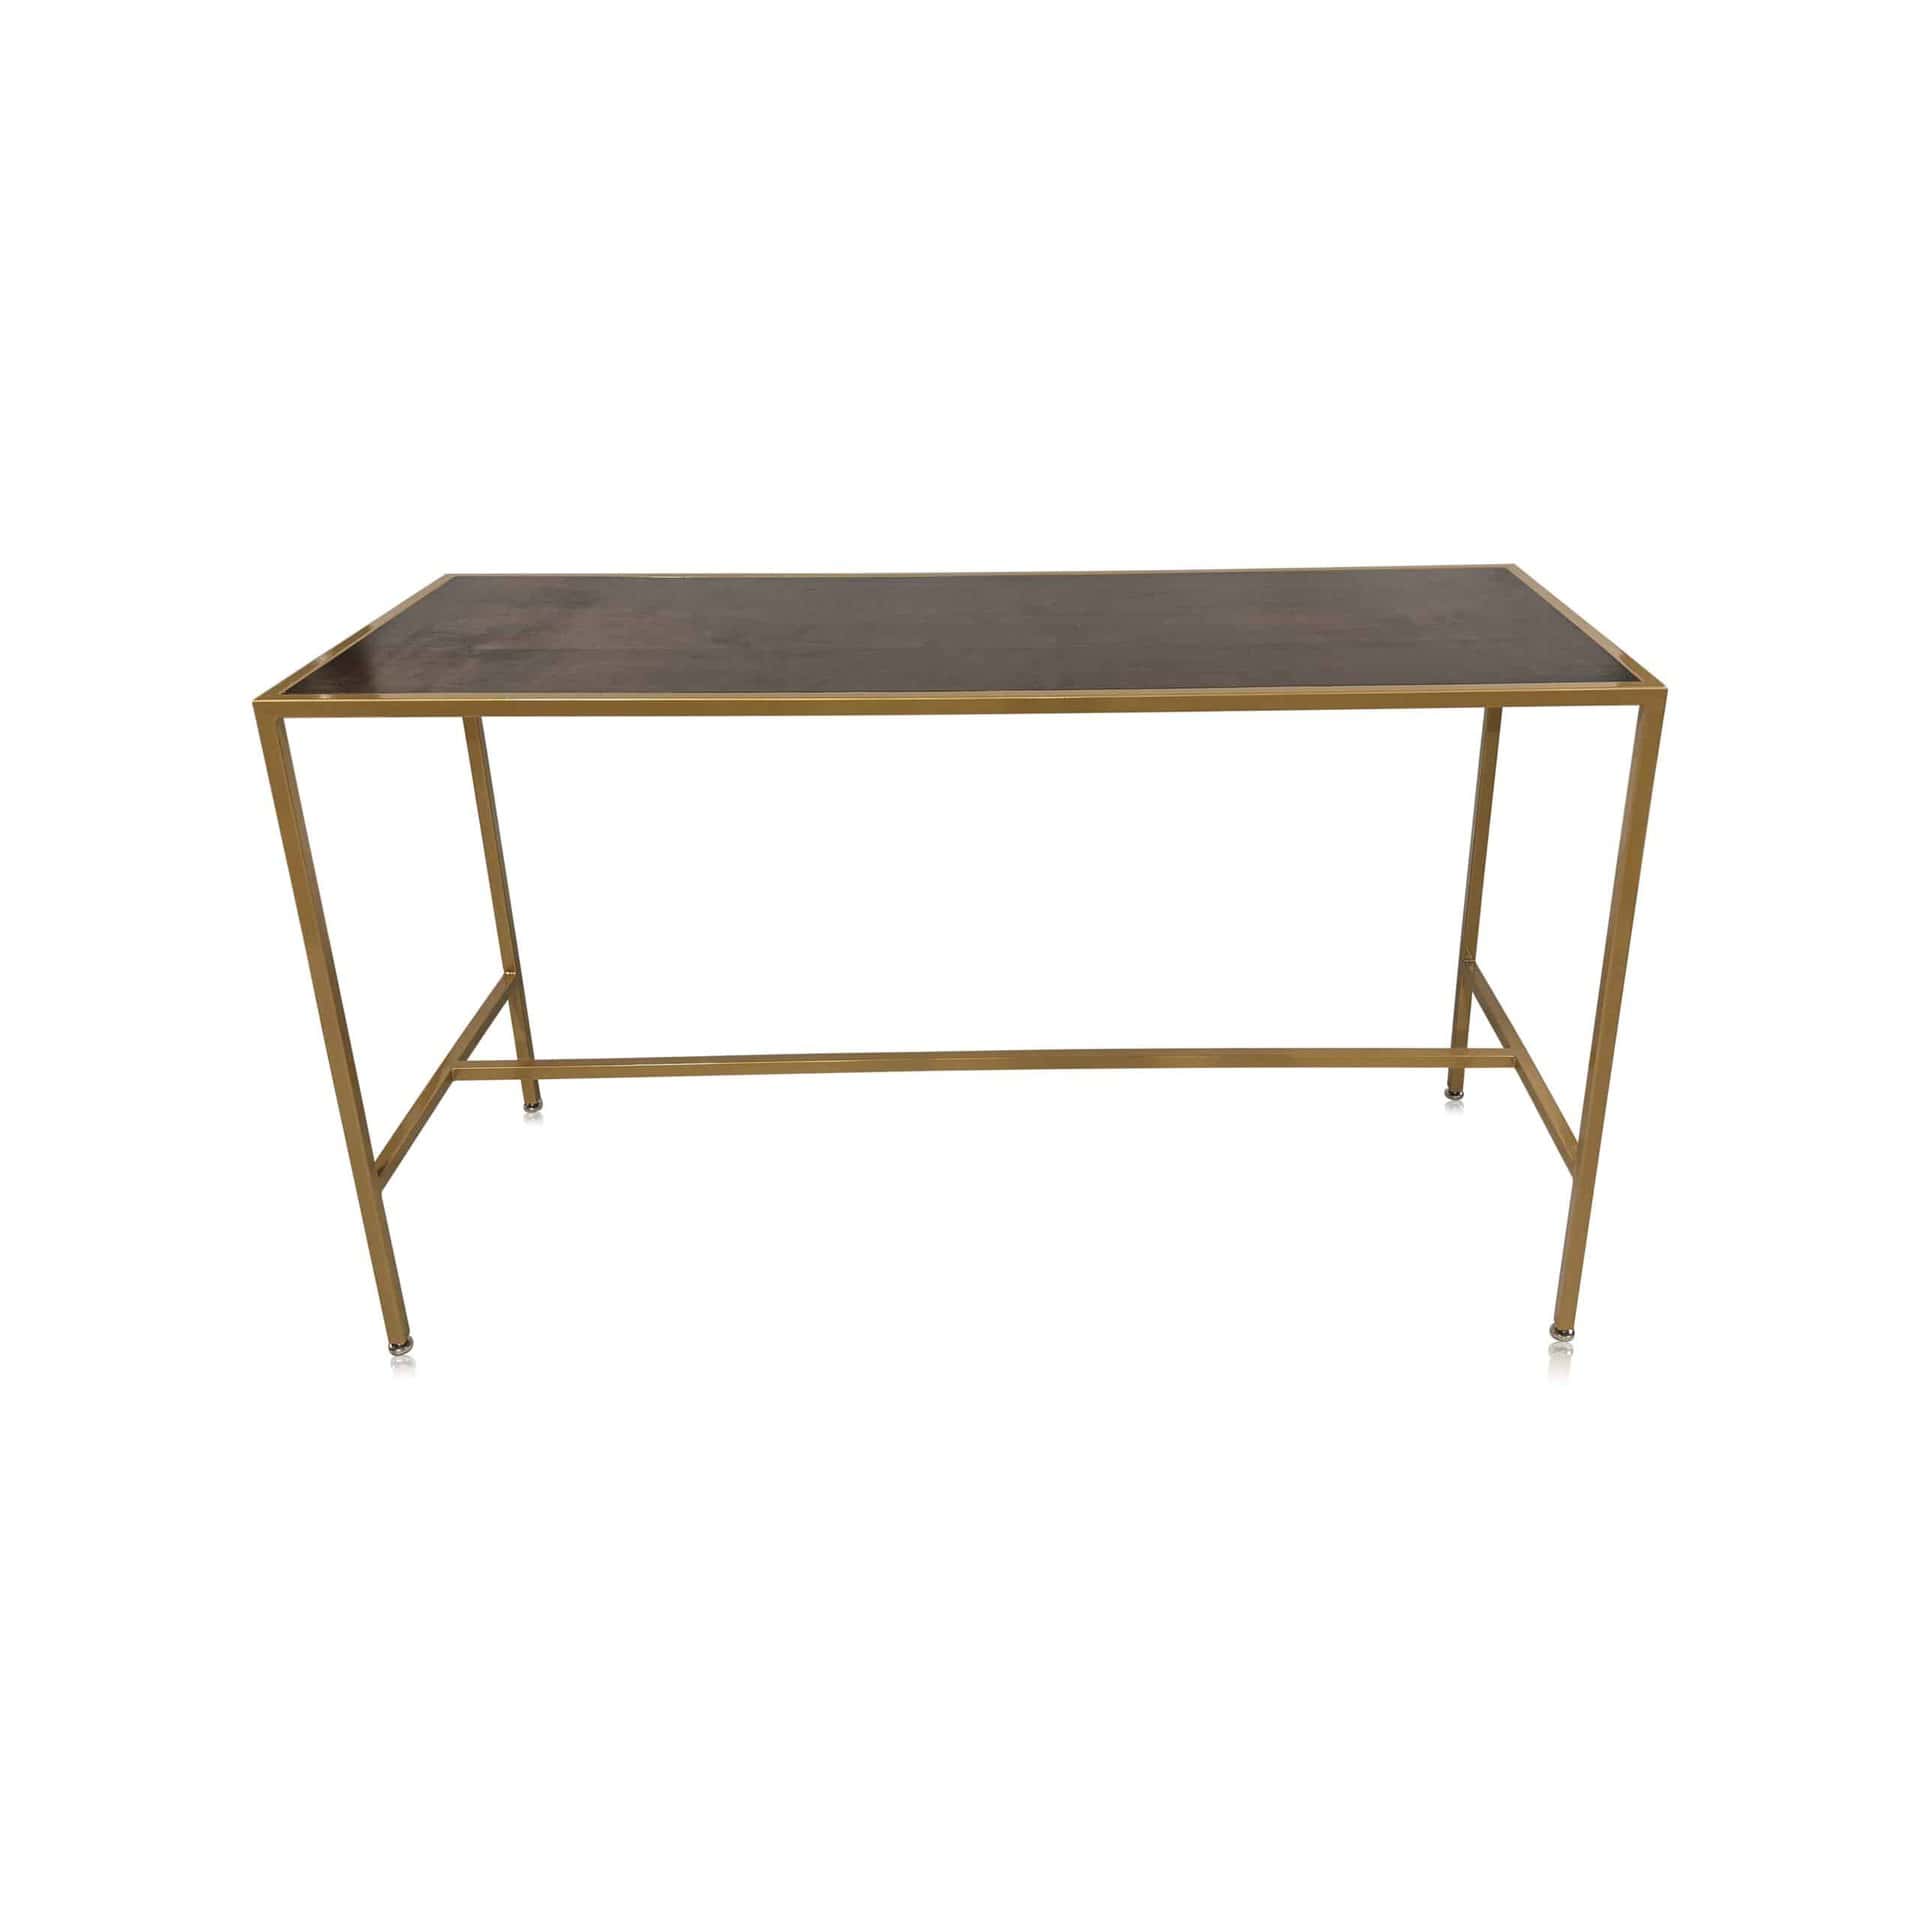 BALI GOLD COMMUNAL BAR TABLE WITH WOOD TOP | Modern Event Rental